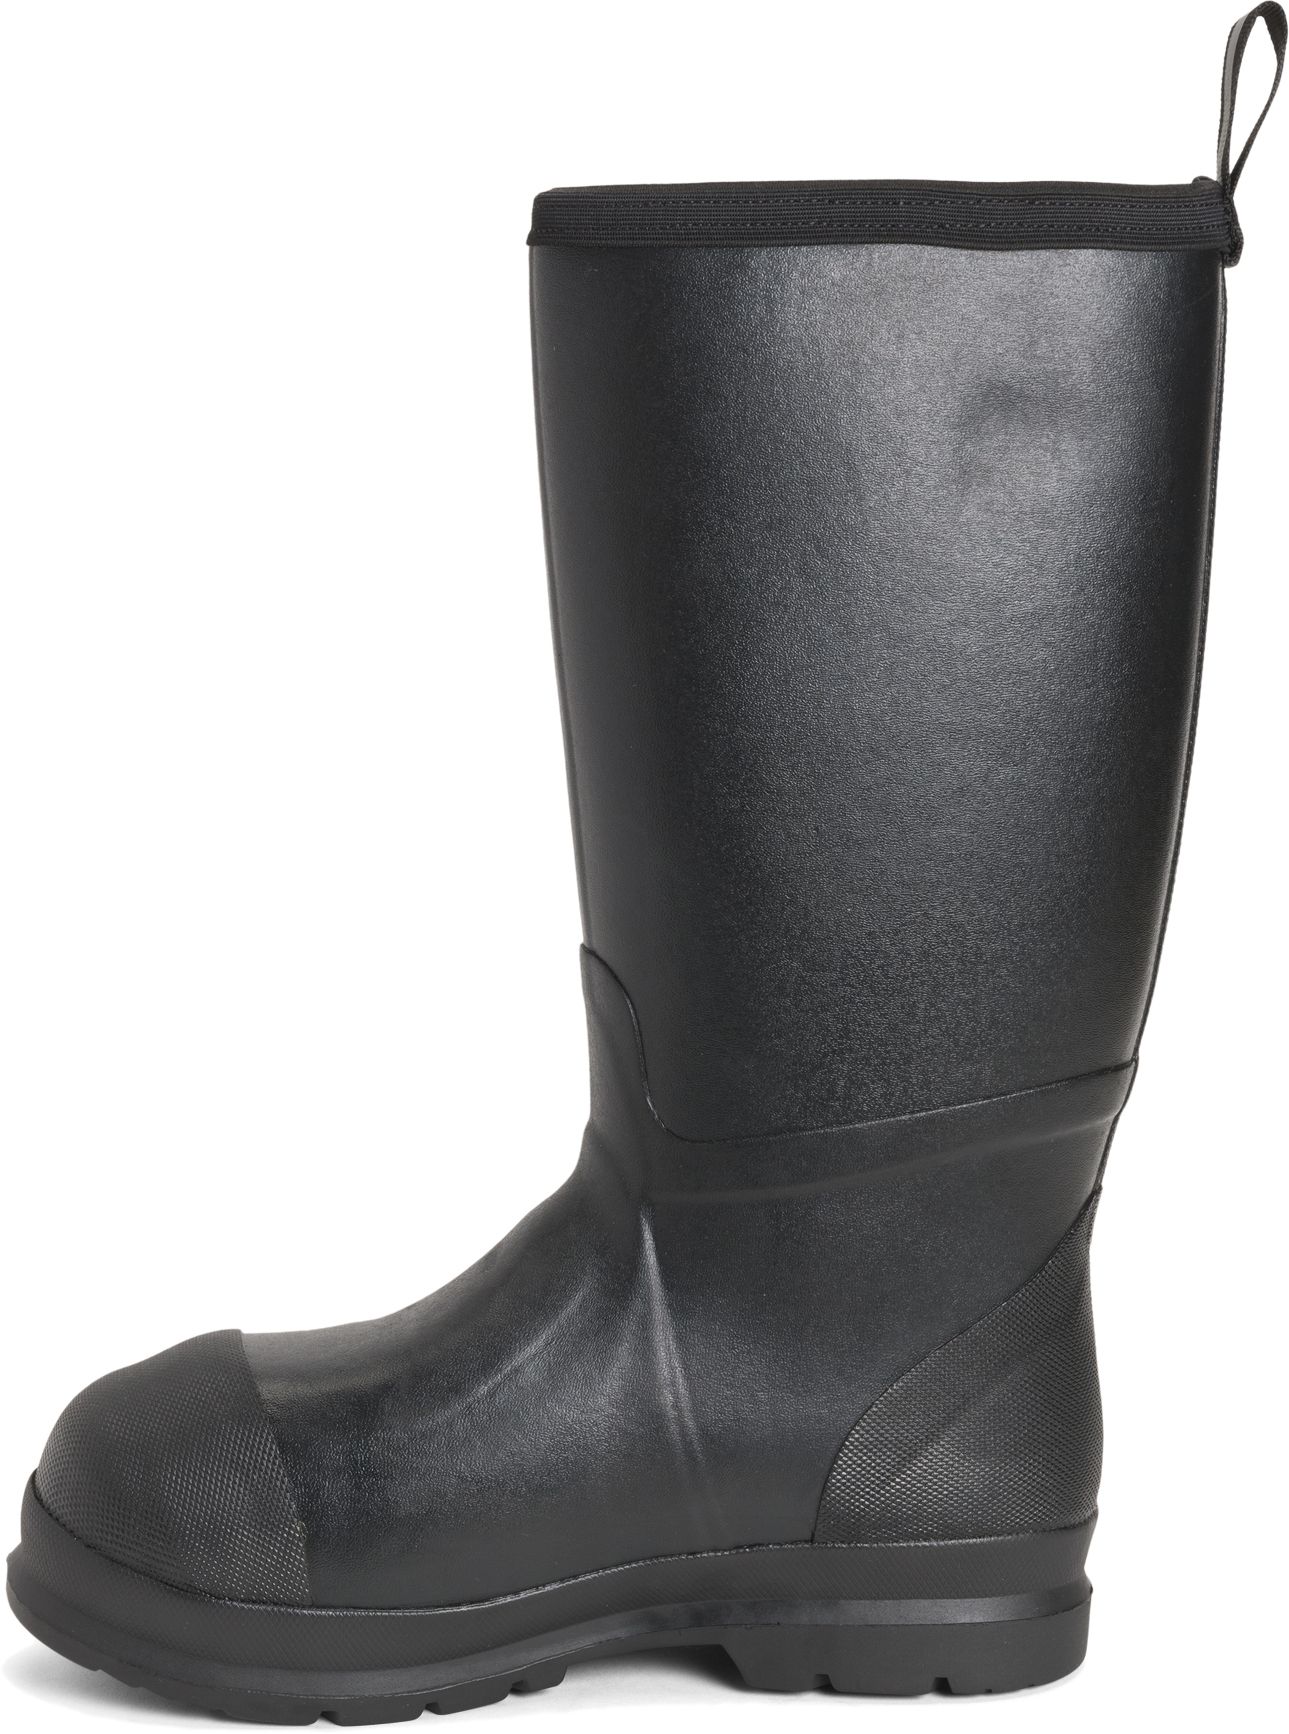 composite toe muck boots